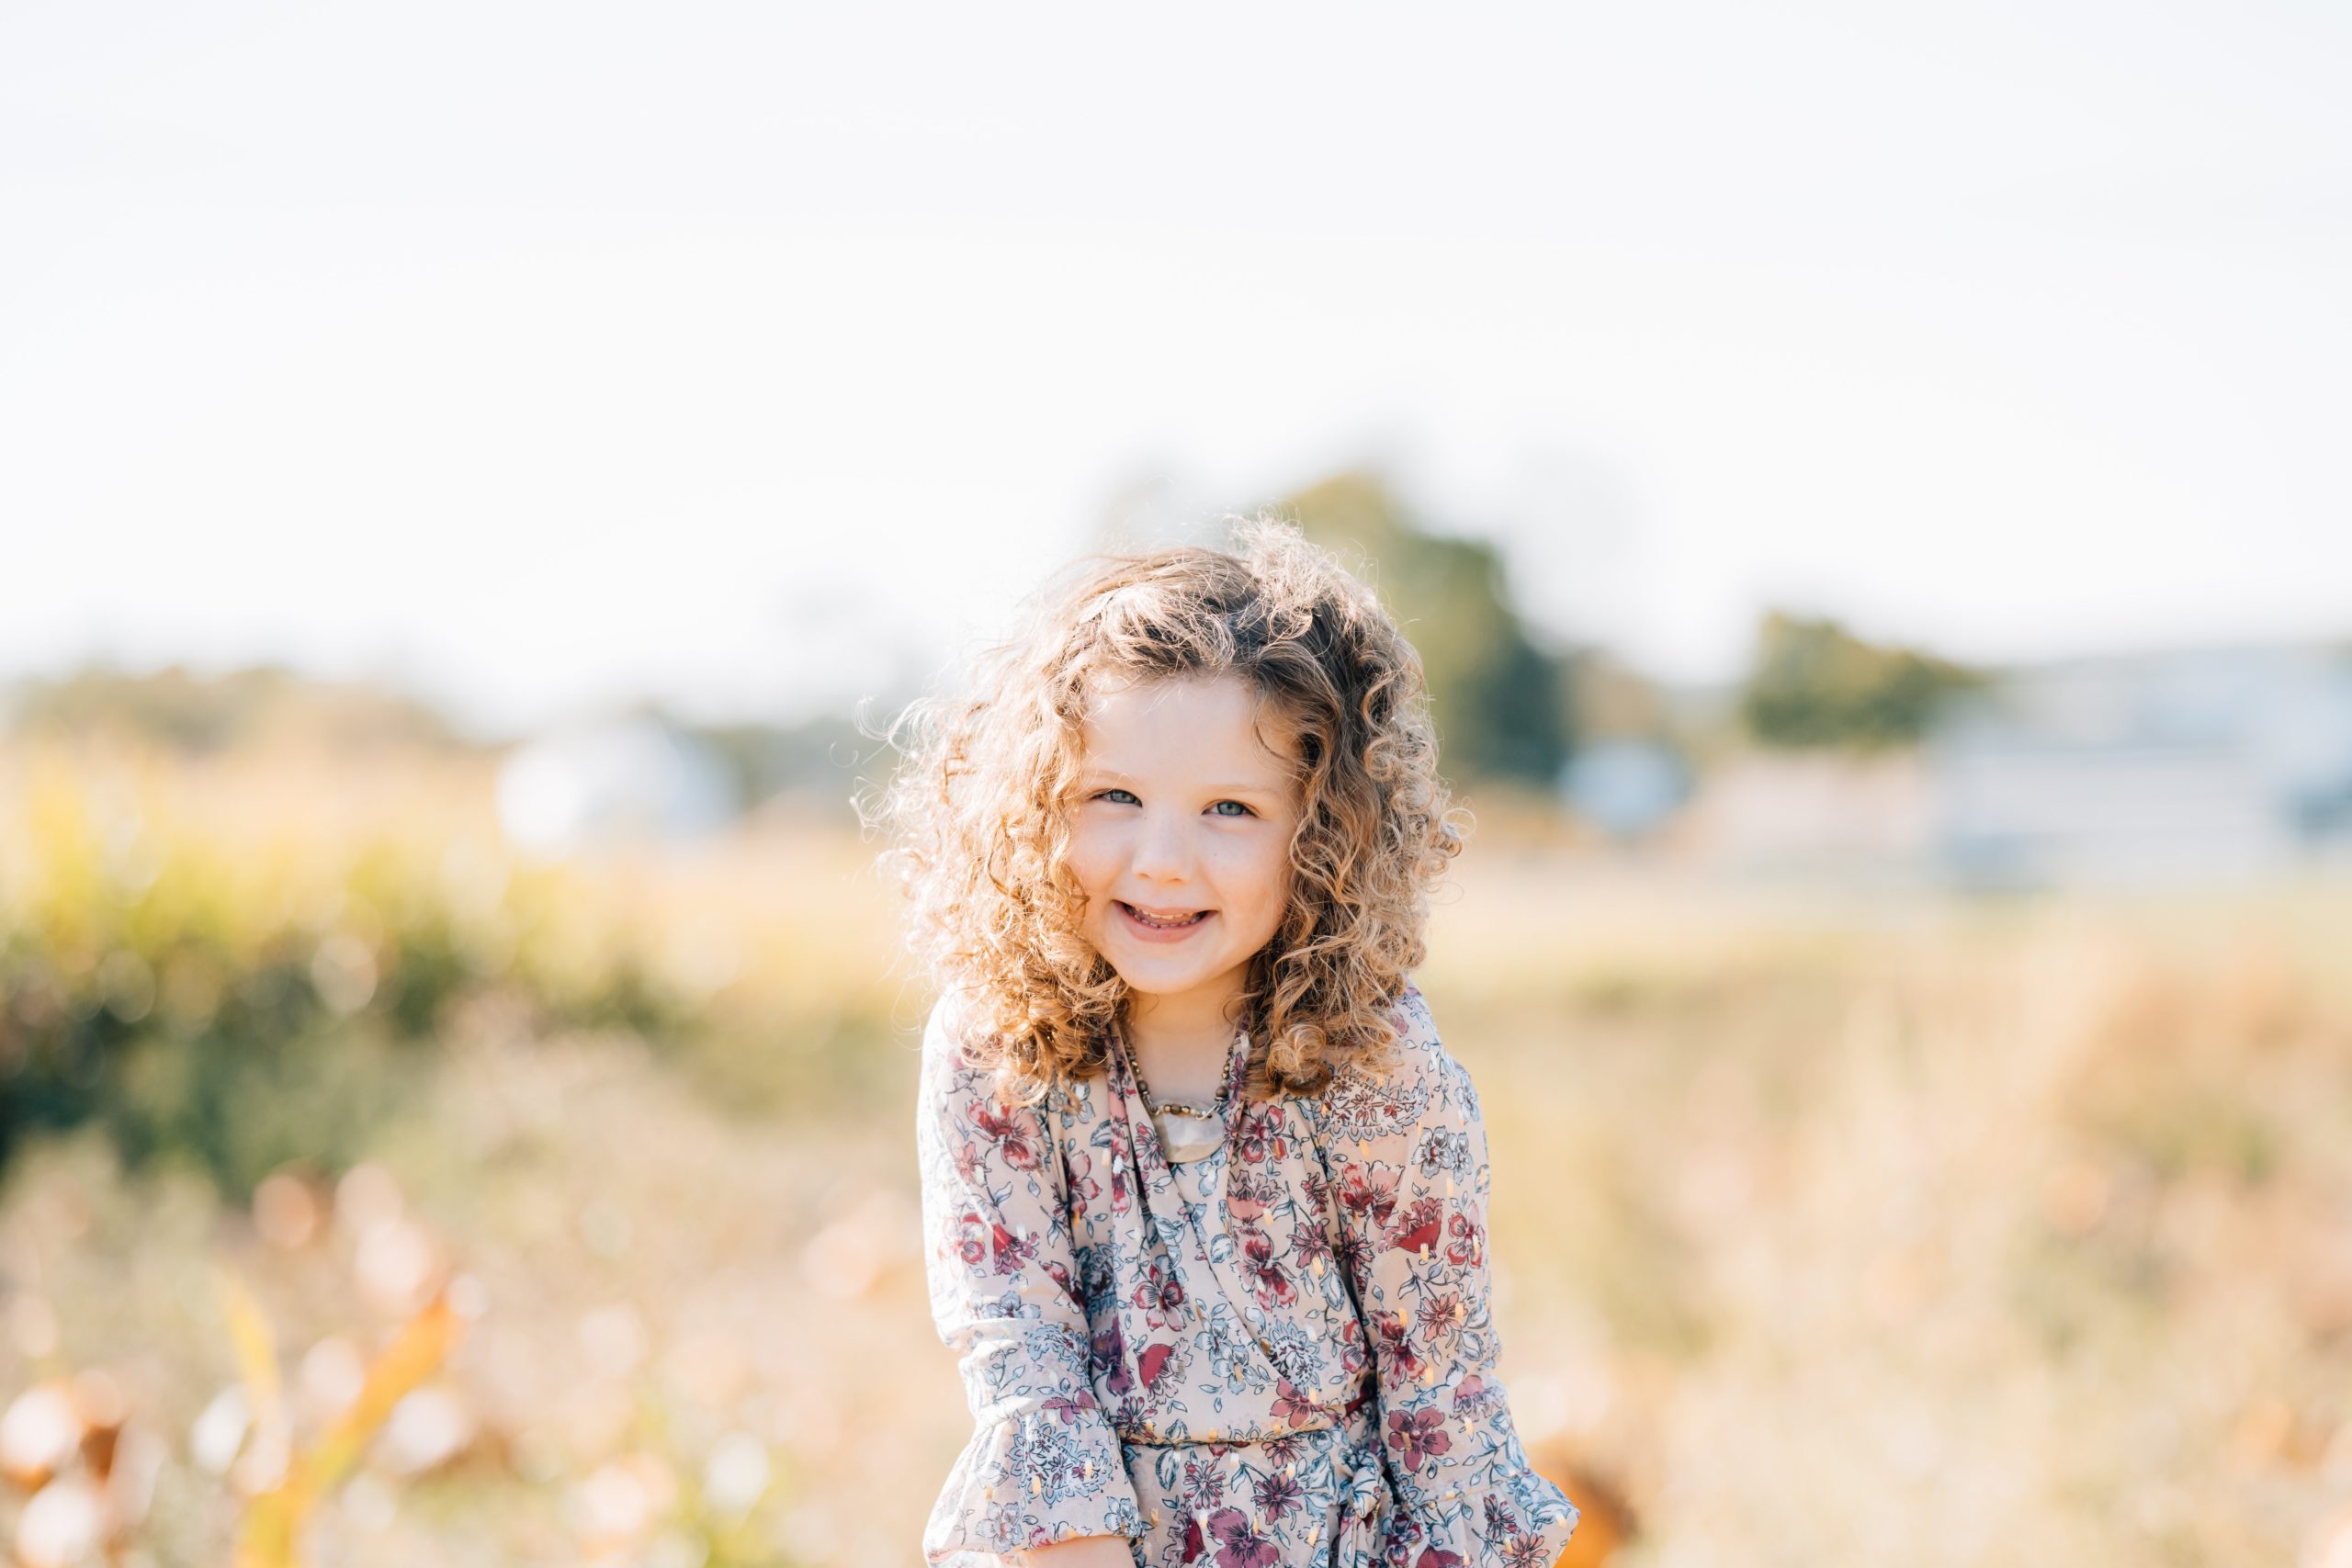 daughter poses individually in beautiful flower pattern fall dressduring at Pumpkin Junction at Everitt Farms in Flemington, NJ Ringoes, NJ with Motherhood and Family Photographer Anne Haug of Golden Heart Photography.